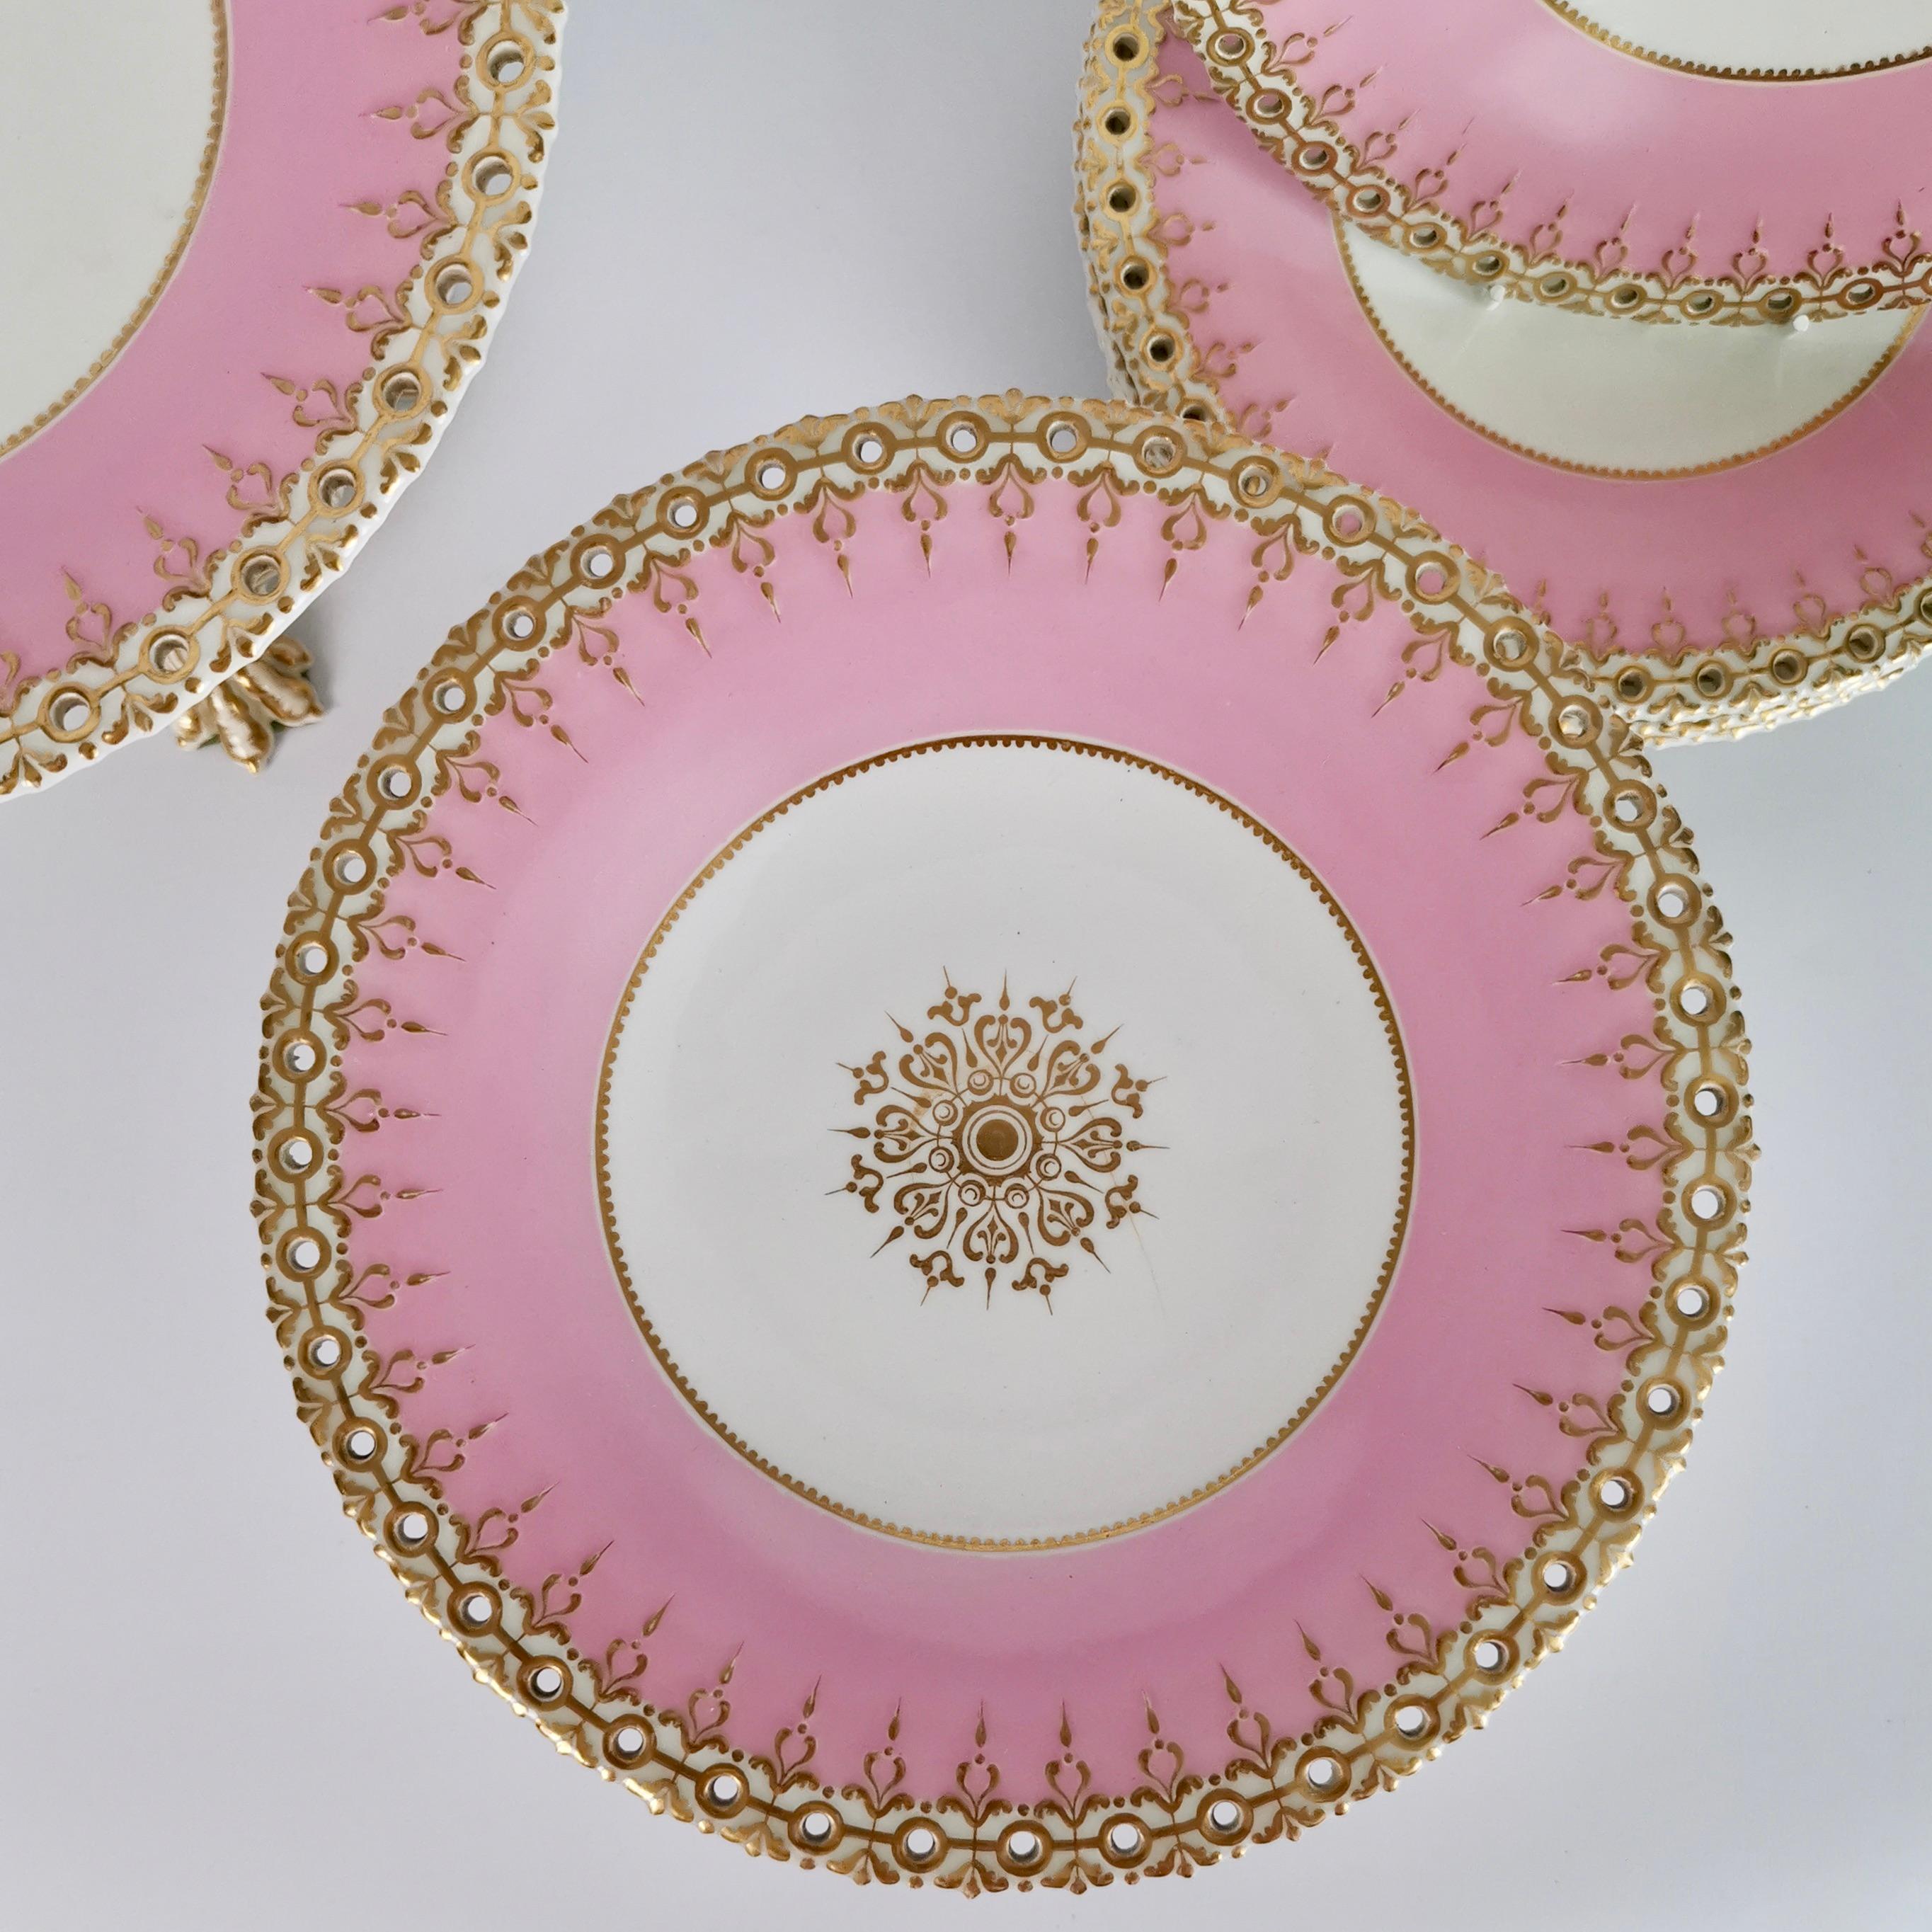 Pink Porcelain Dessert Service, Spectacular Claw-Footed Tazzas, Victorian 5